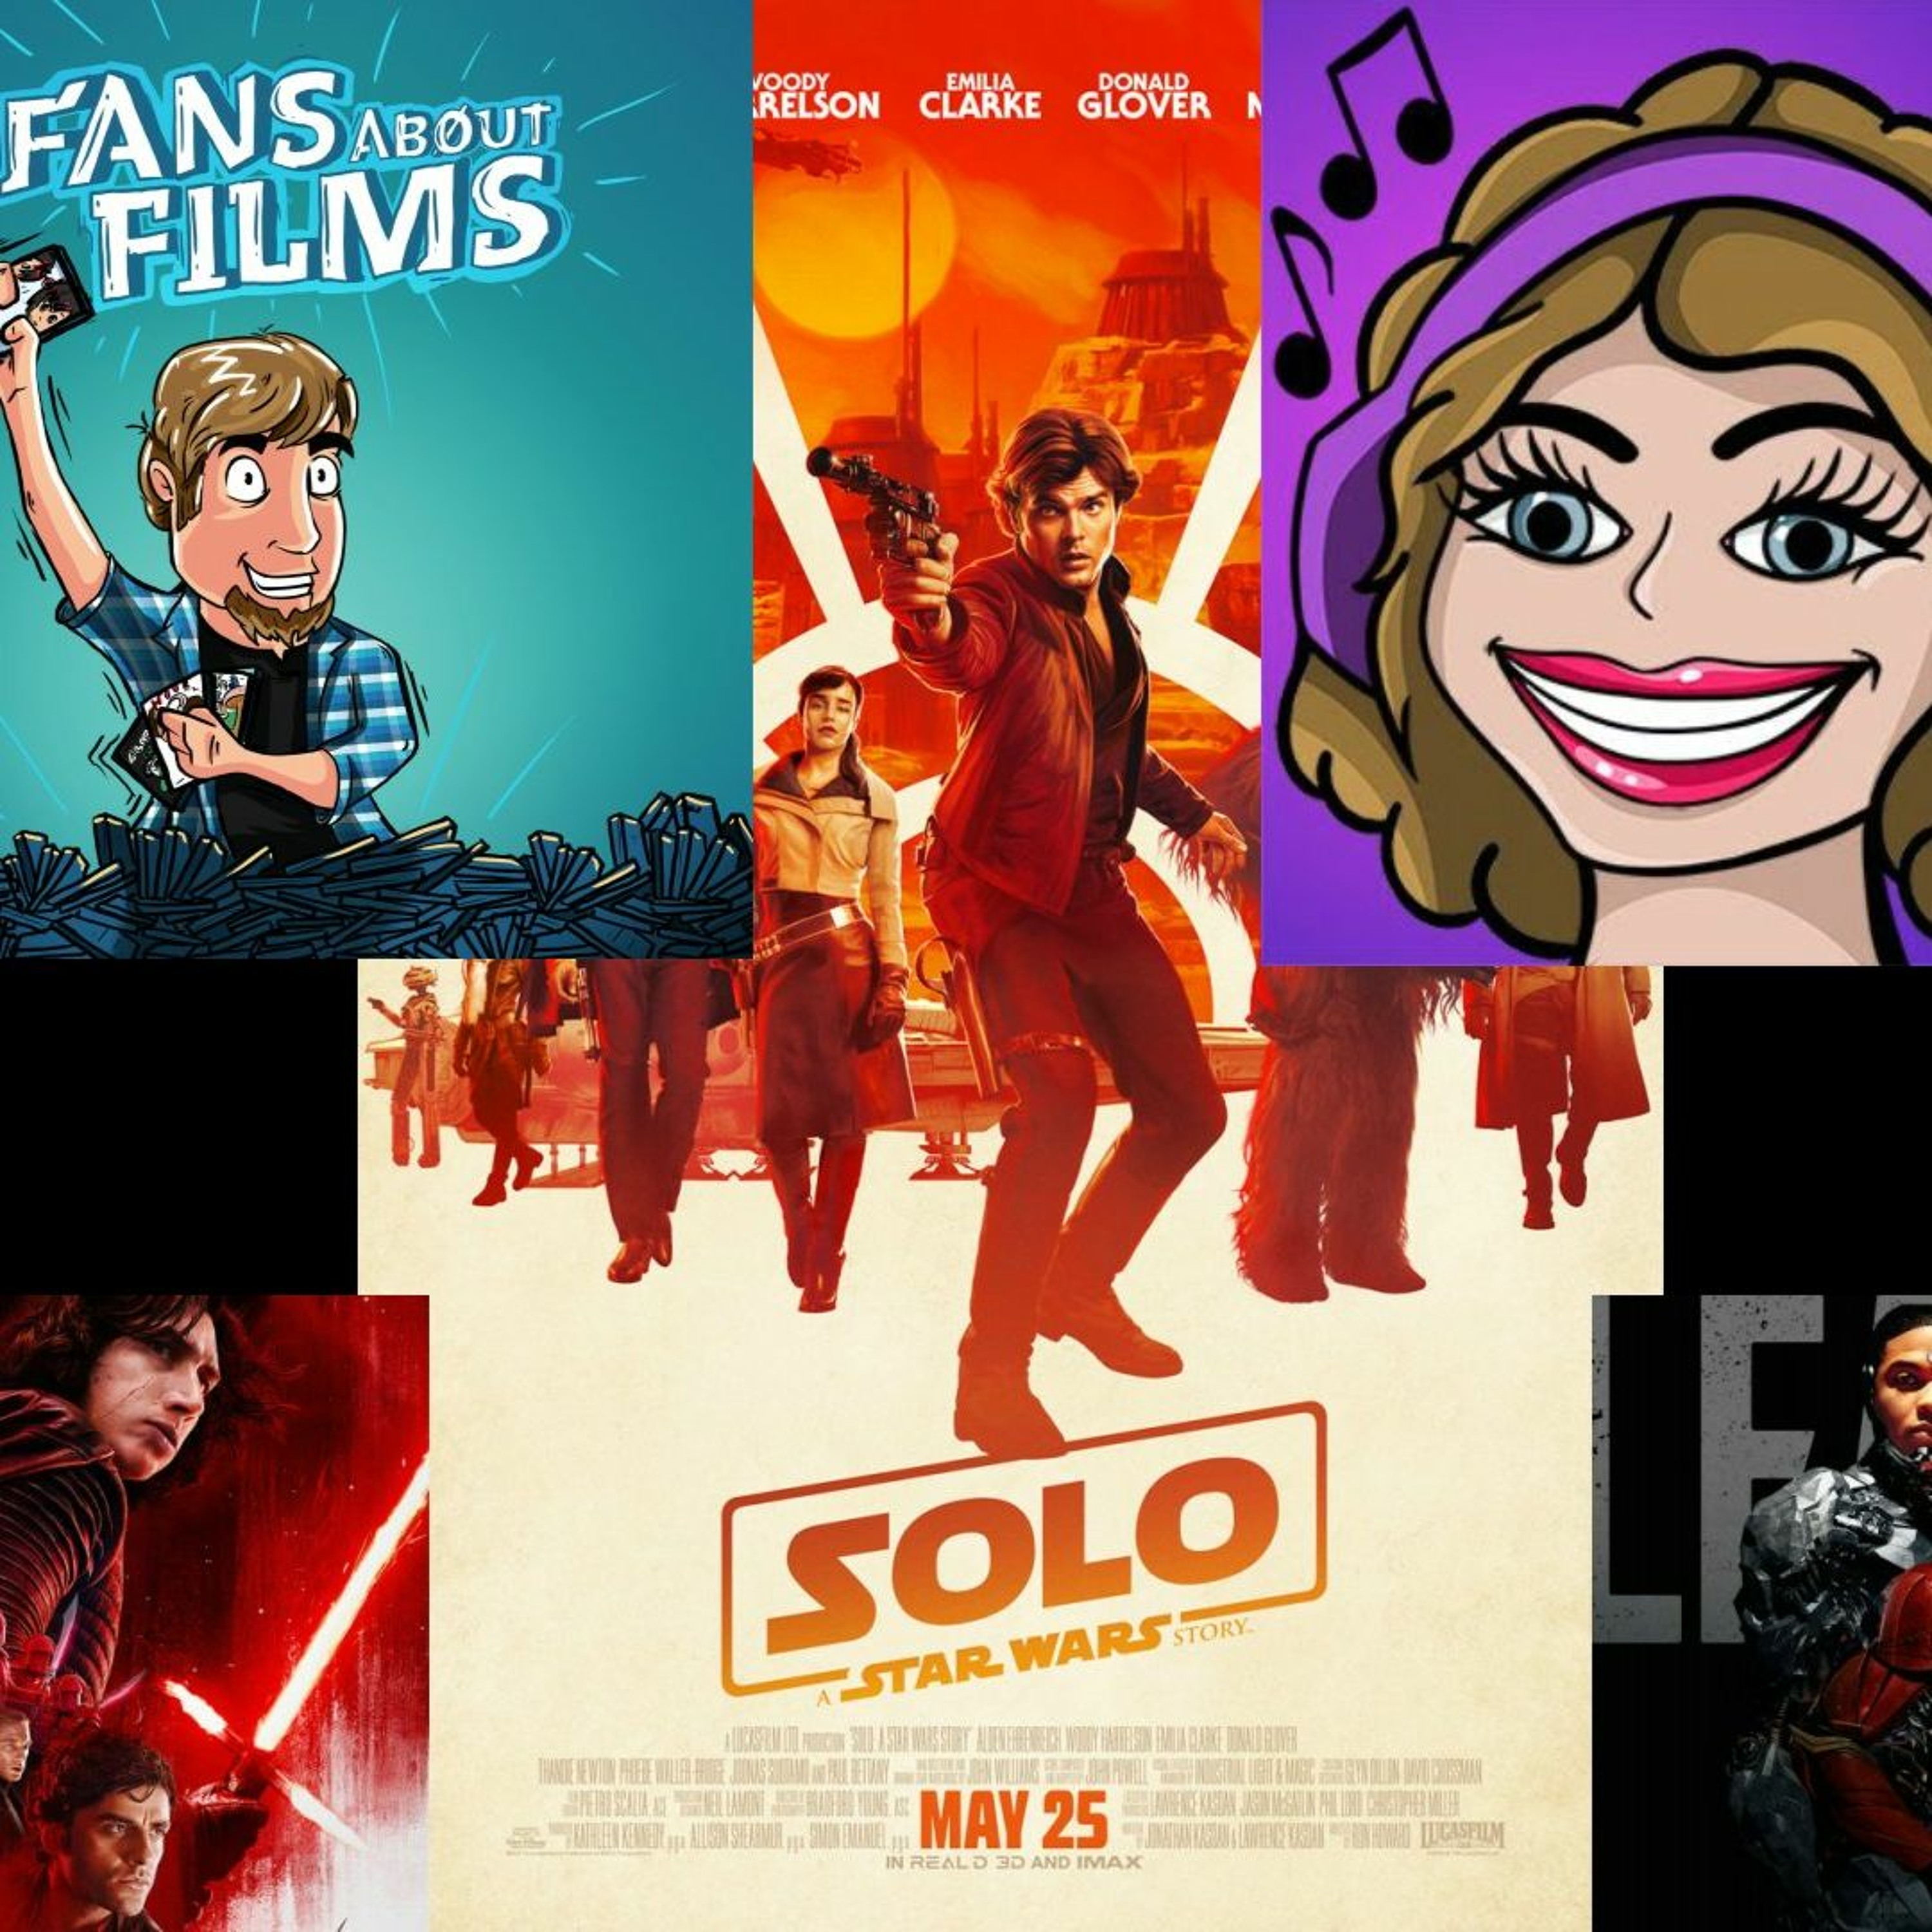 Fans About Films 23: Solo: A Star Wars Story Spoiler-Talk (English)